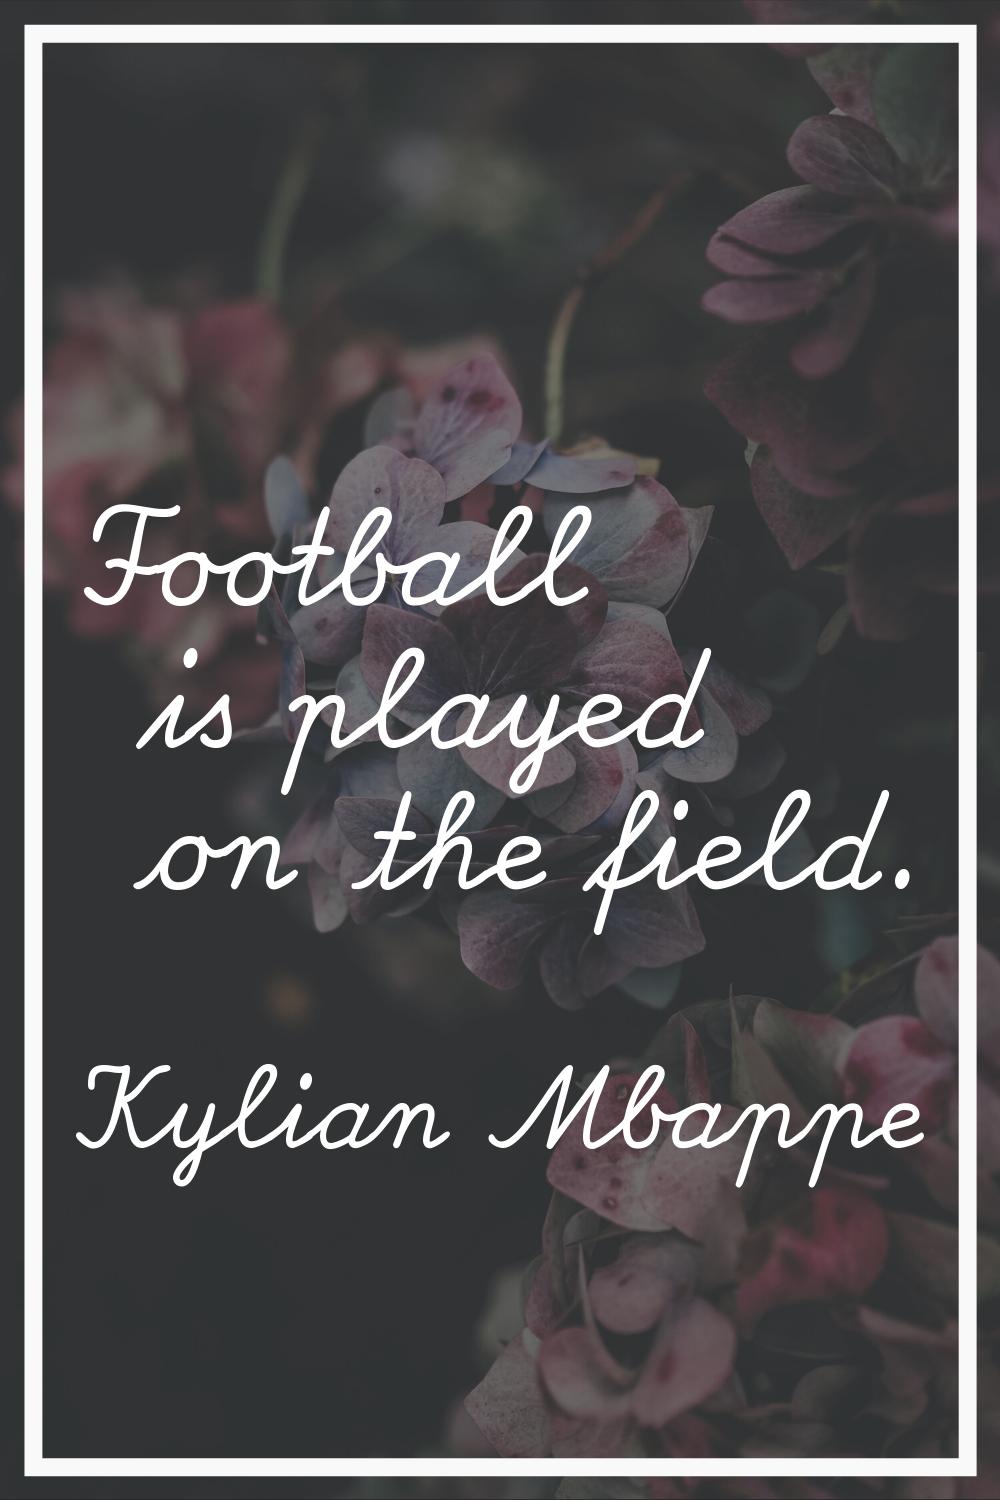 Football is played on the field.